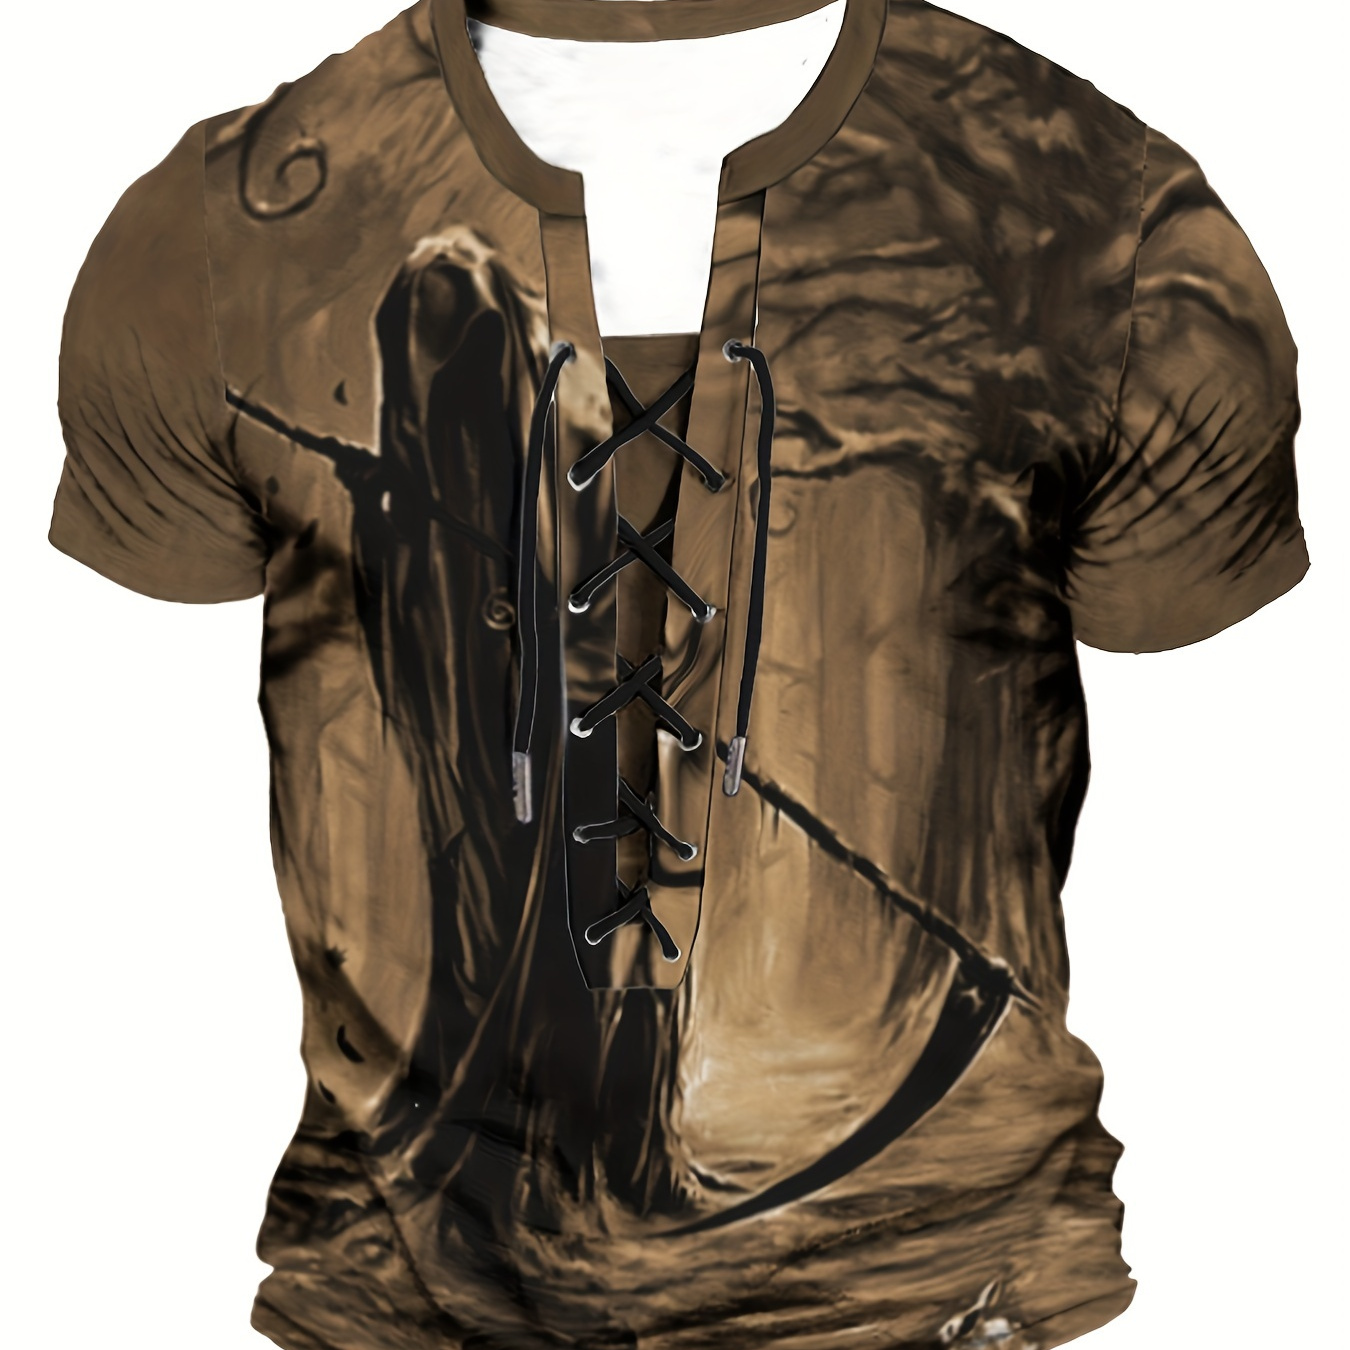 

Men's 3d Digital Hooded Figure With Scythe Pattern Crew Neck And Short Sleeve T-shirt, Novel And Cool Retro Style Tops For Summer Outdoors Wear